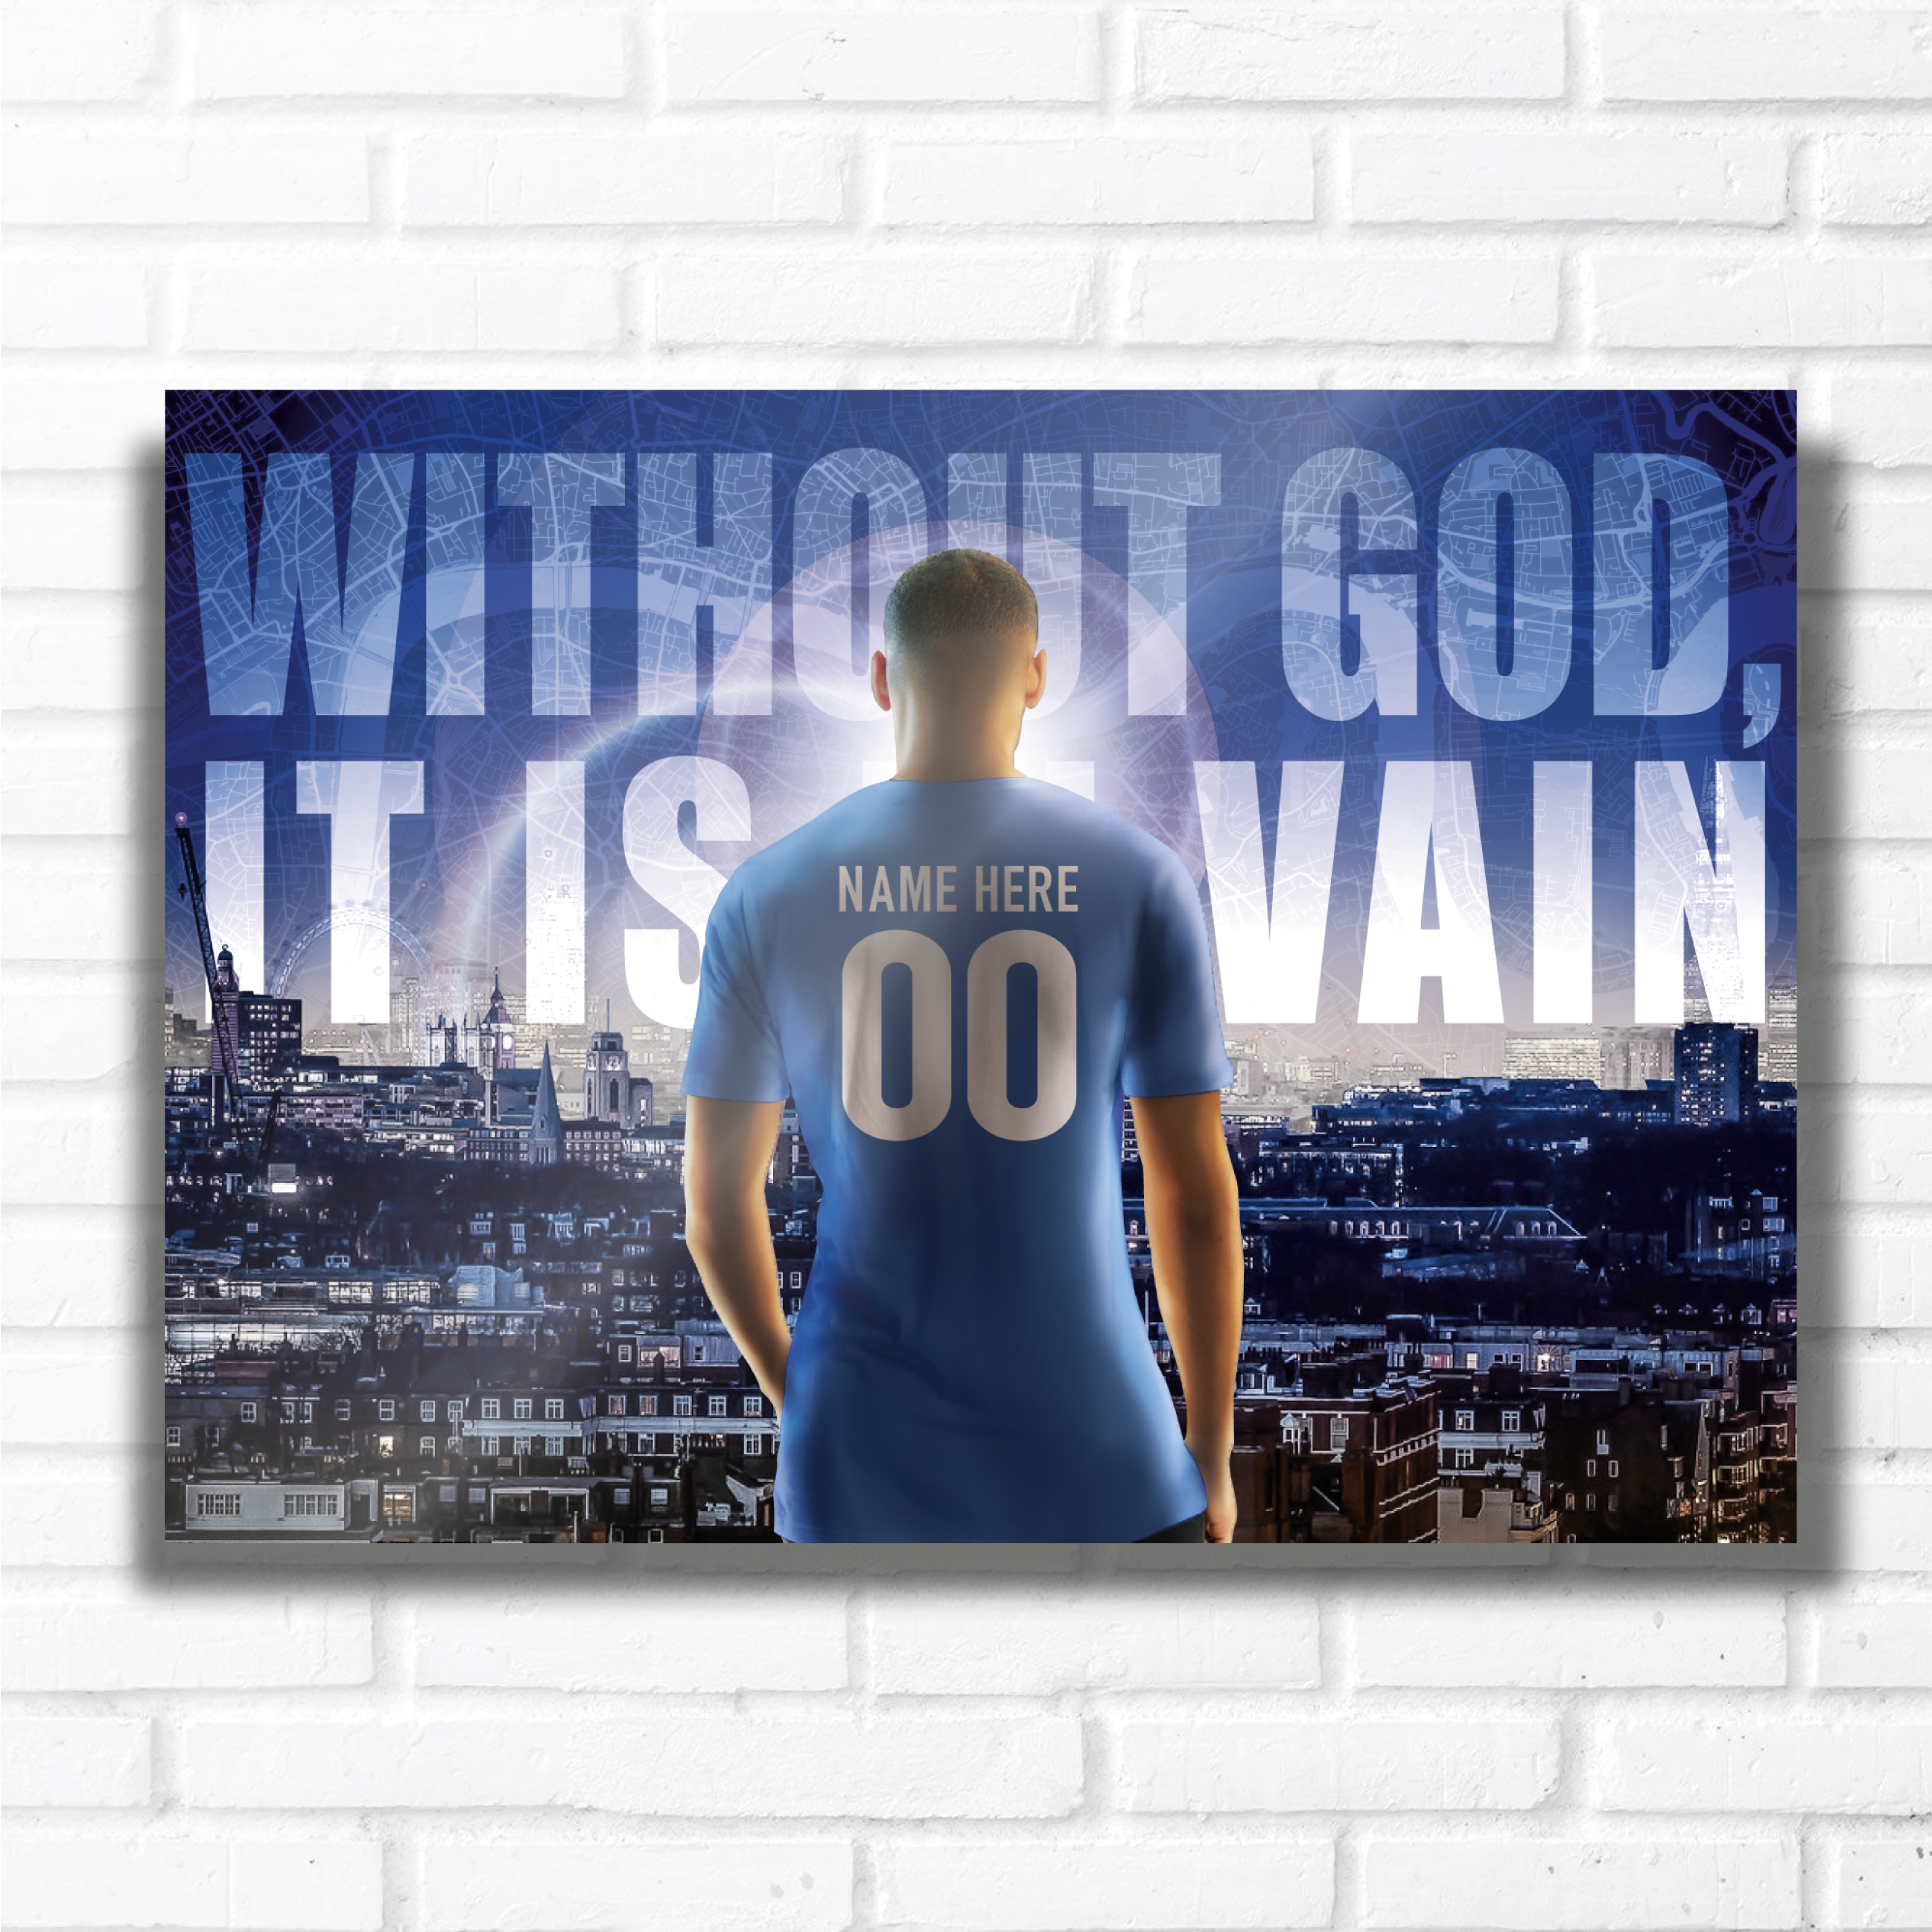 PERSONALISED FOOTBALL TEAM LONDON BLUES Name and Number Metal Plaque Sign Studio Man-Cave Bedroom Wall Art Decor